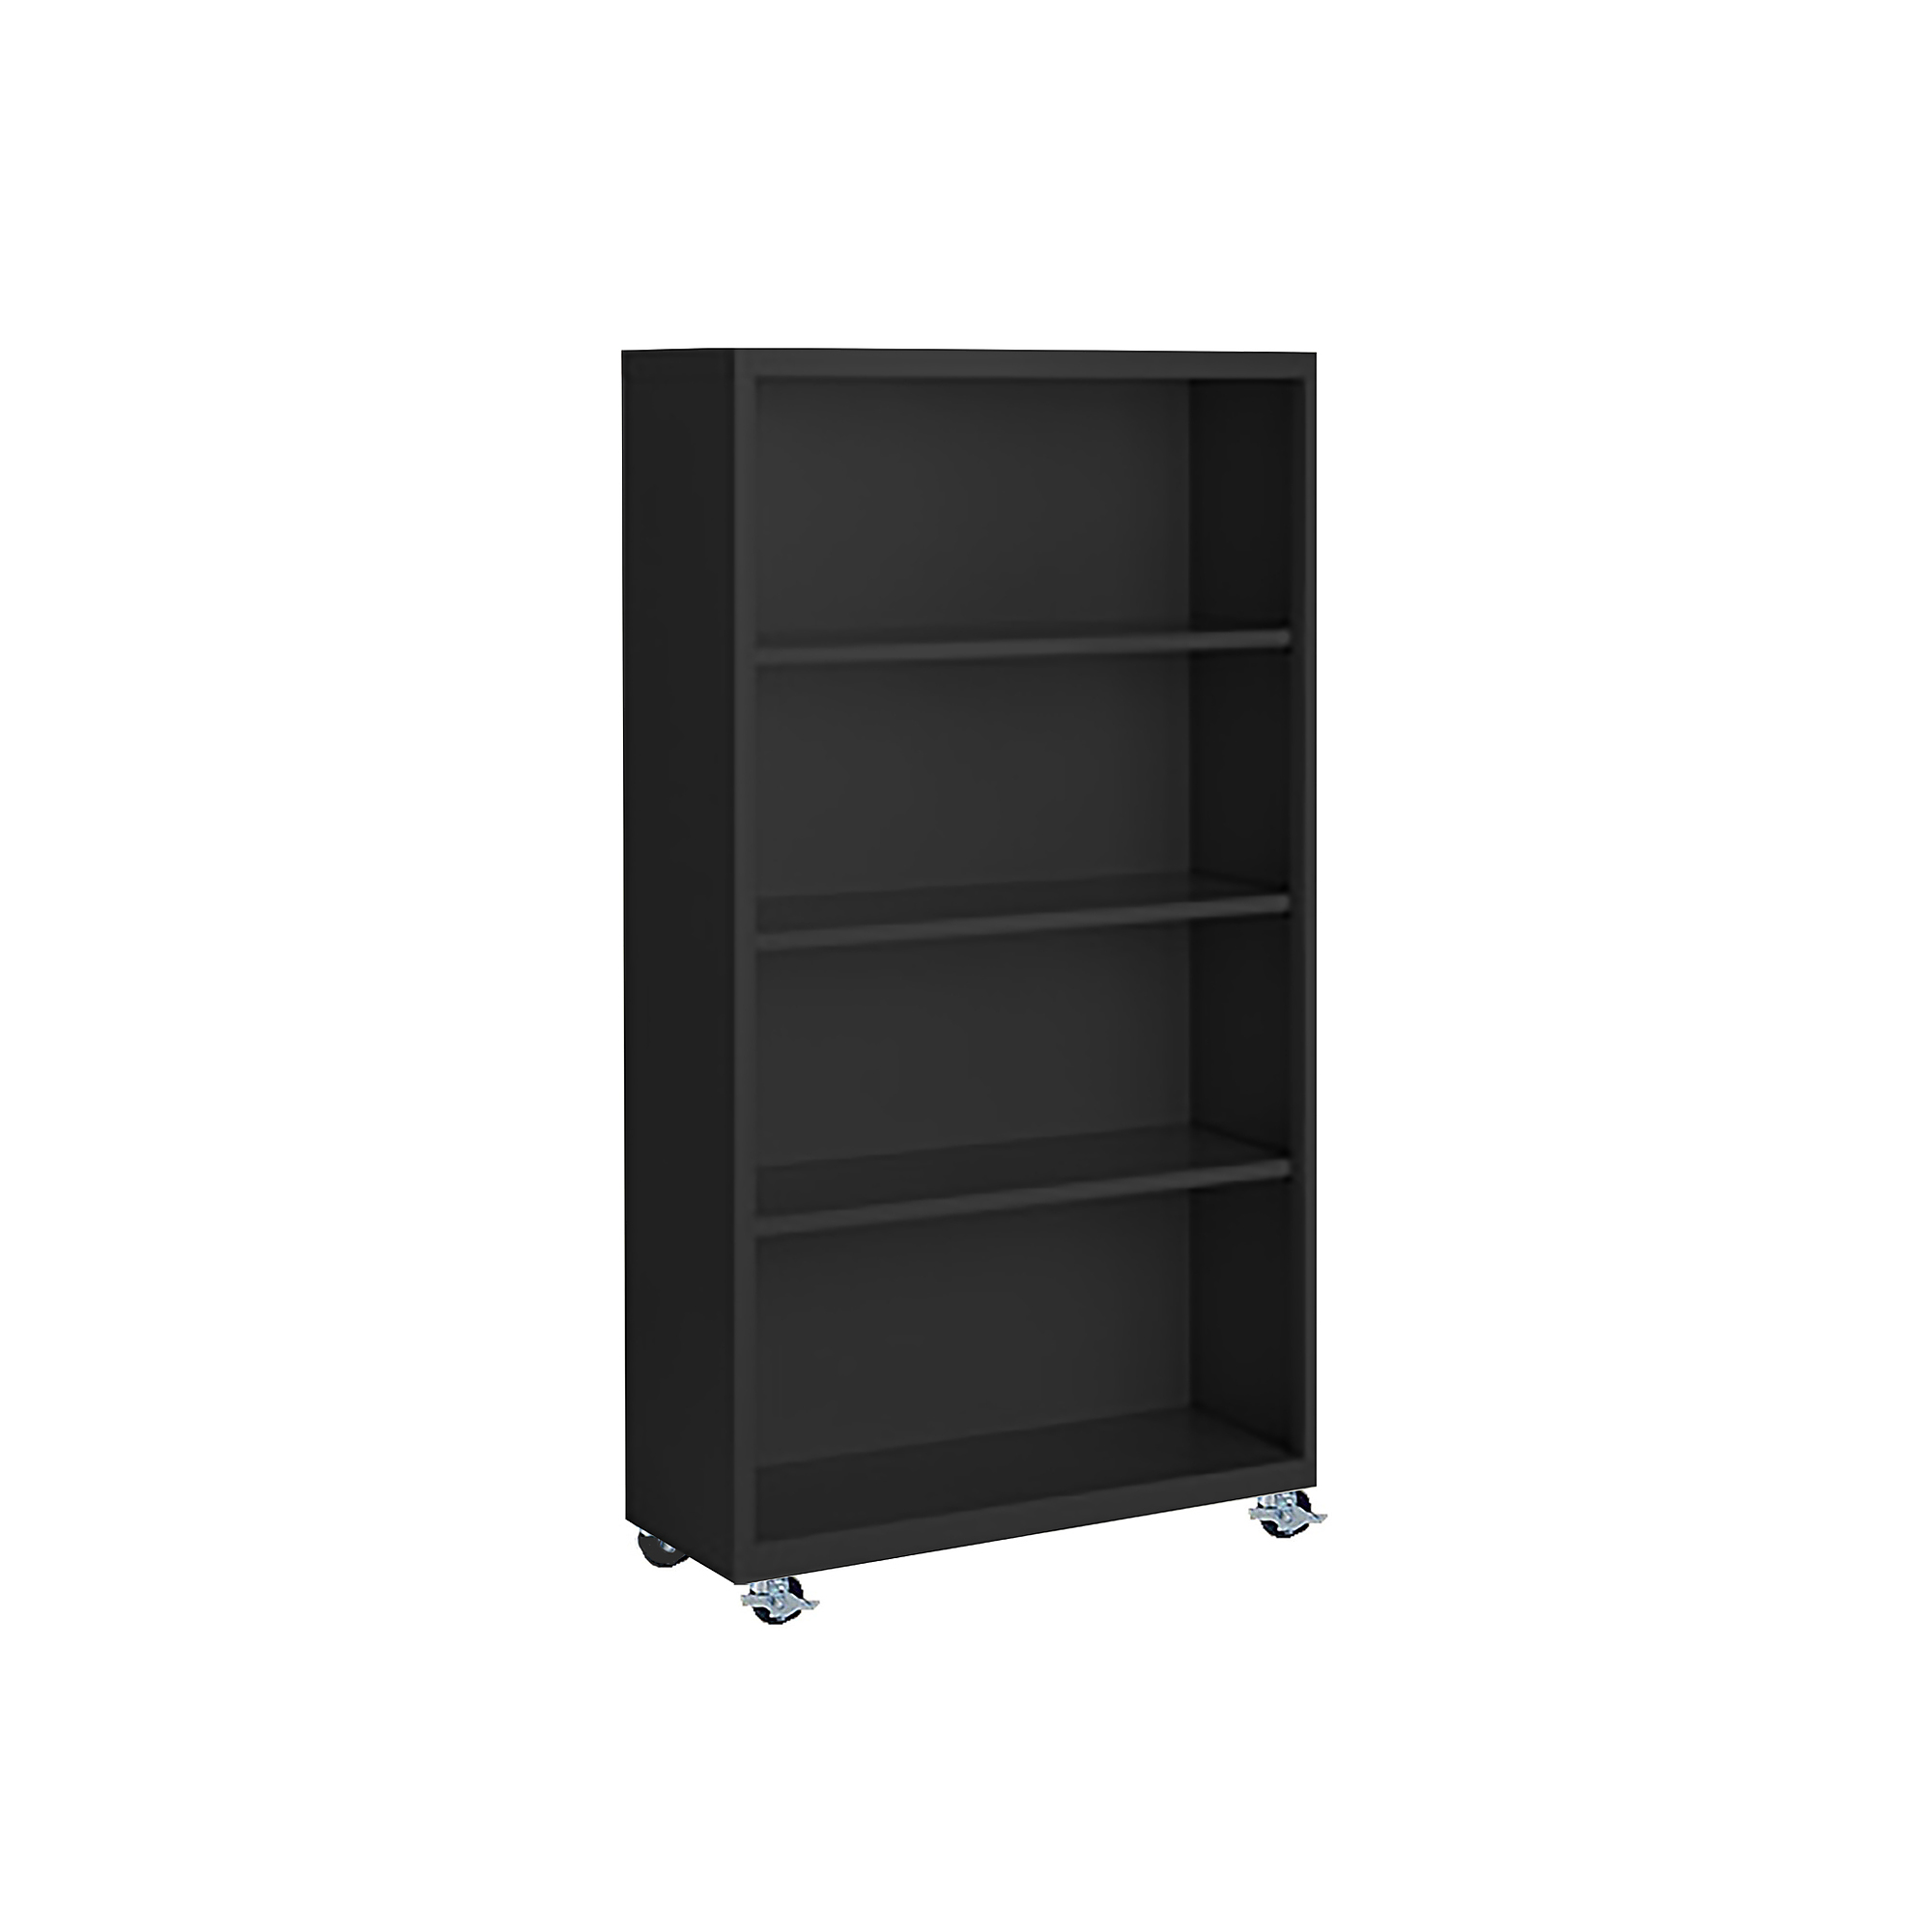 Steel Cabinets USA, 36Inchx18Inchx55Inch Black Mobile Bookcase Fully Assembled, Height 55 in, Shelves (qty.) 4, Material Steel, Model MBCA-365518-B